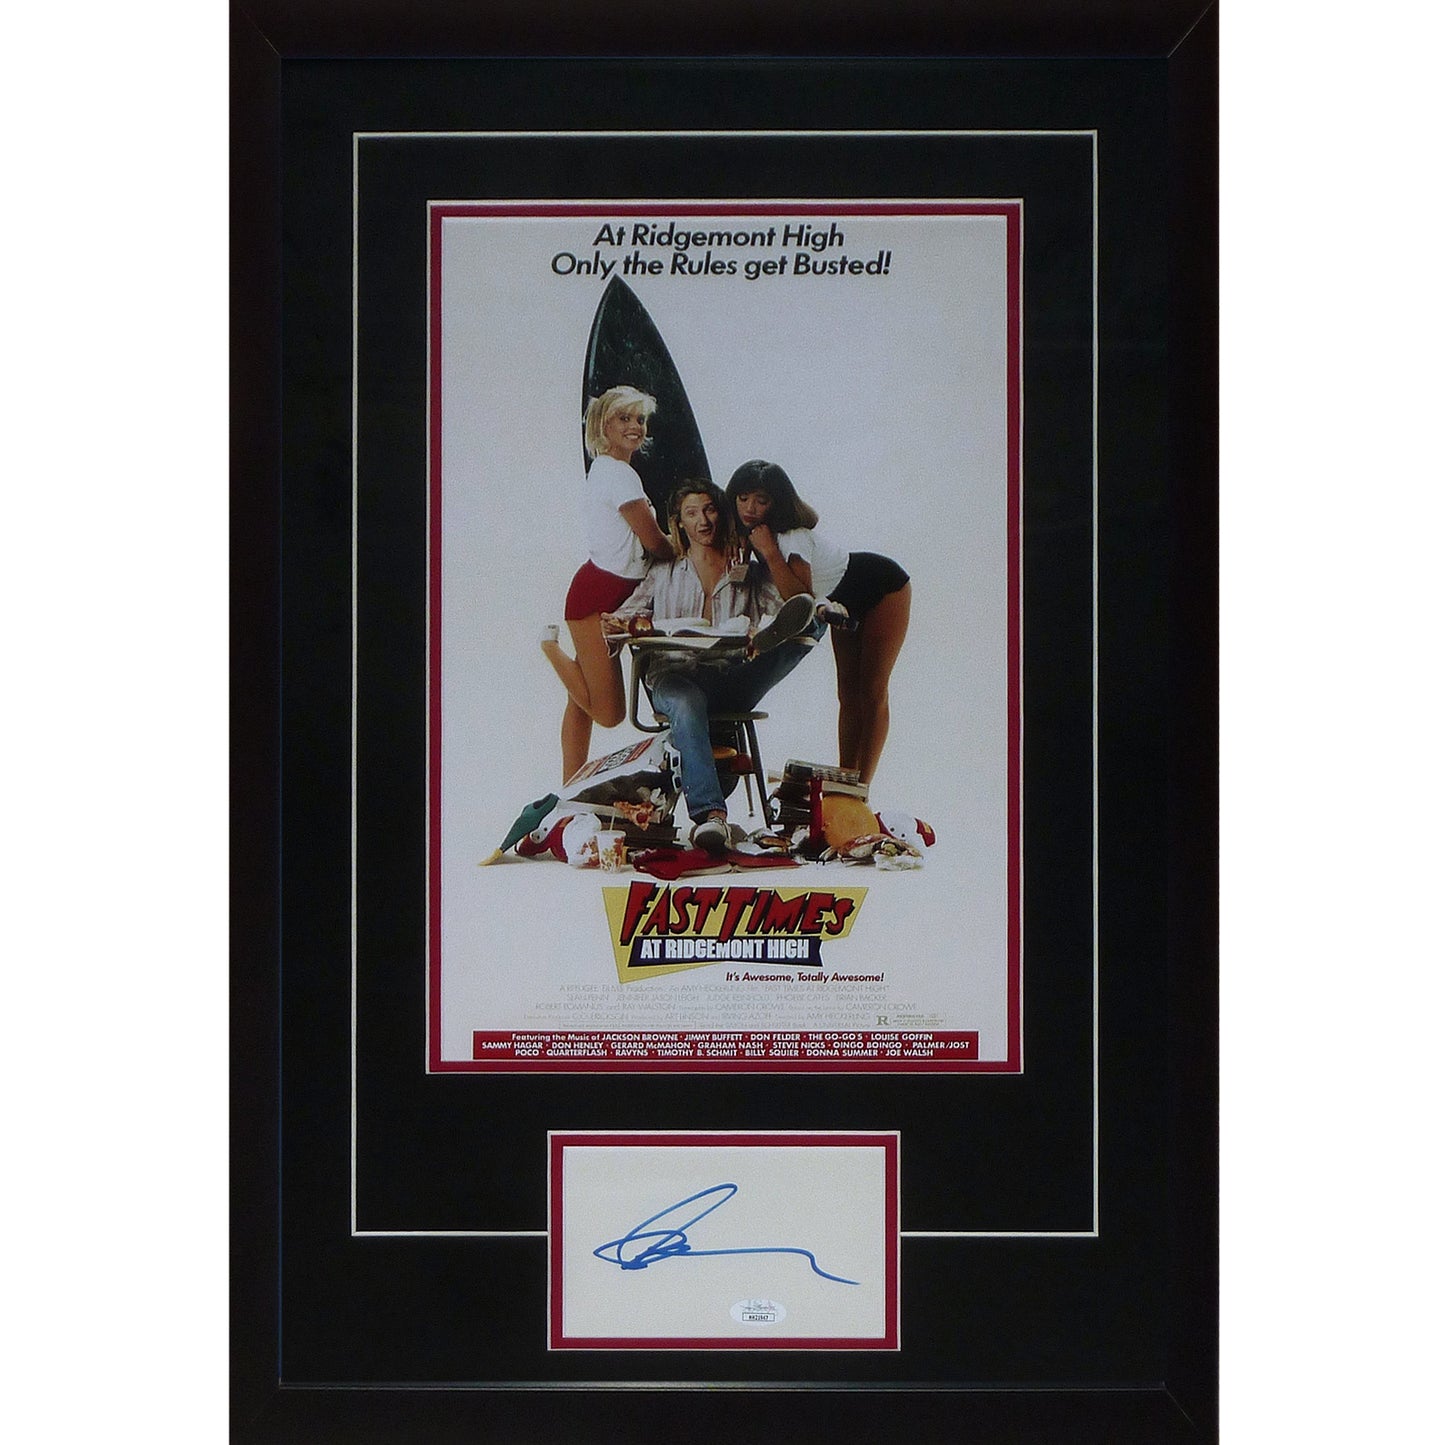 Fast Times At Ridgemont High 11x17 Movie Poster Deluxe Framed with Sean Penn Autograph - JSA